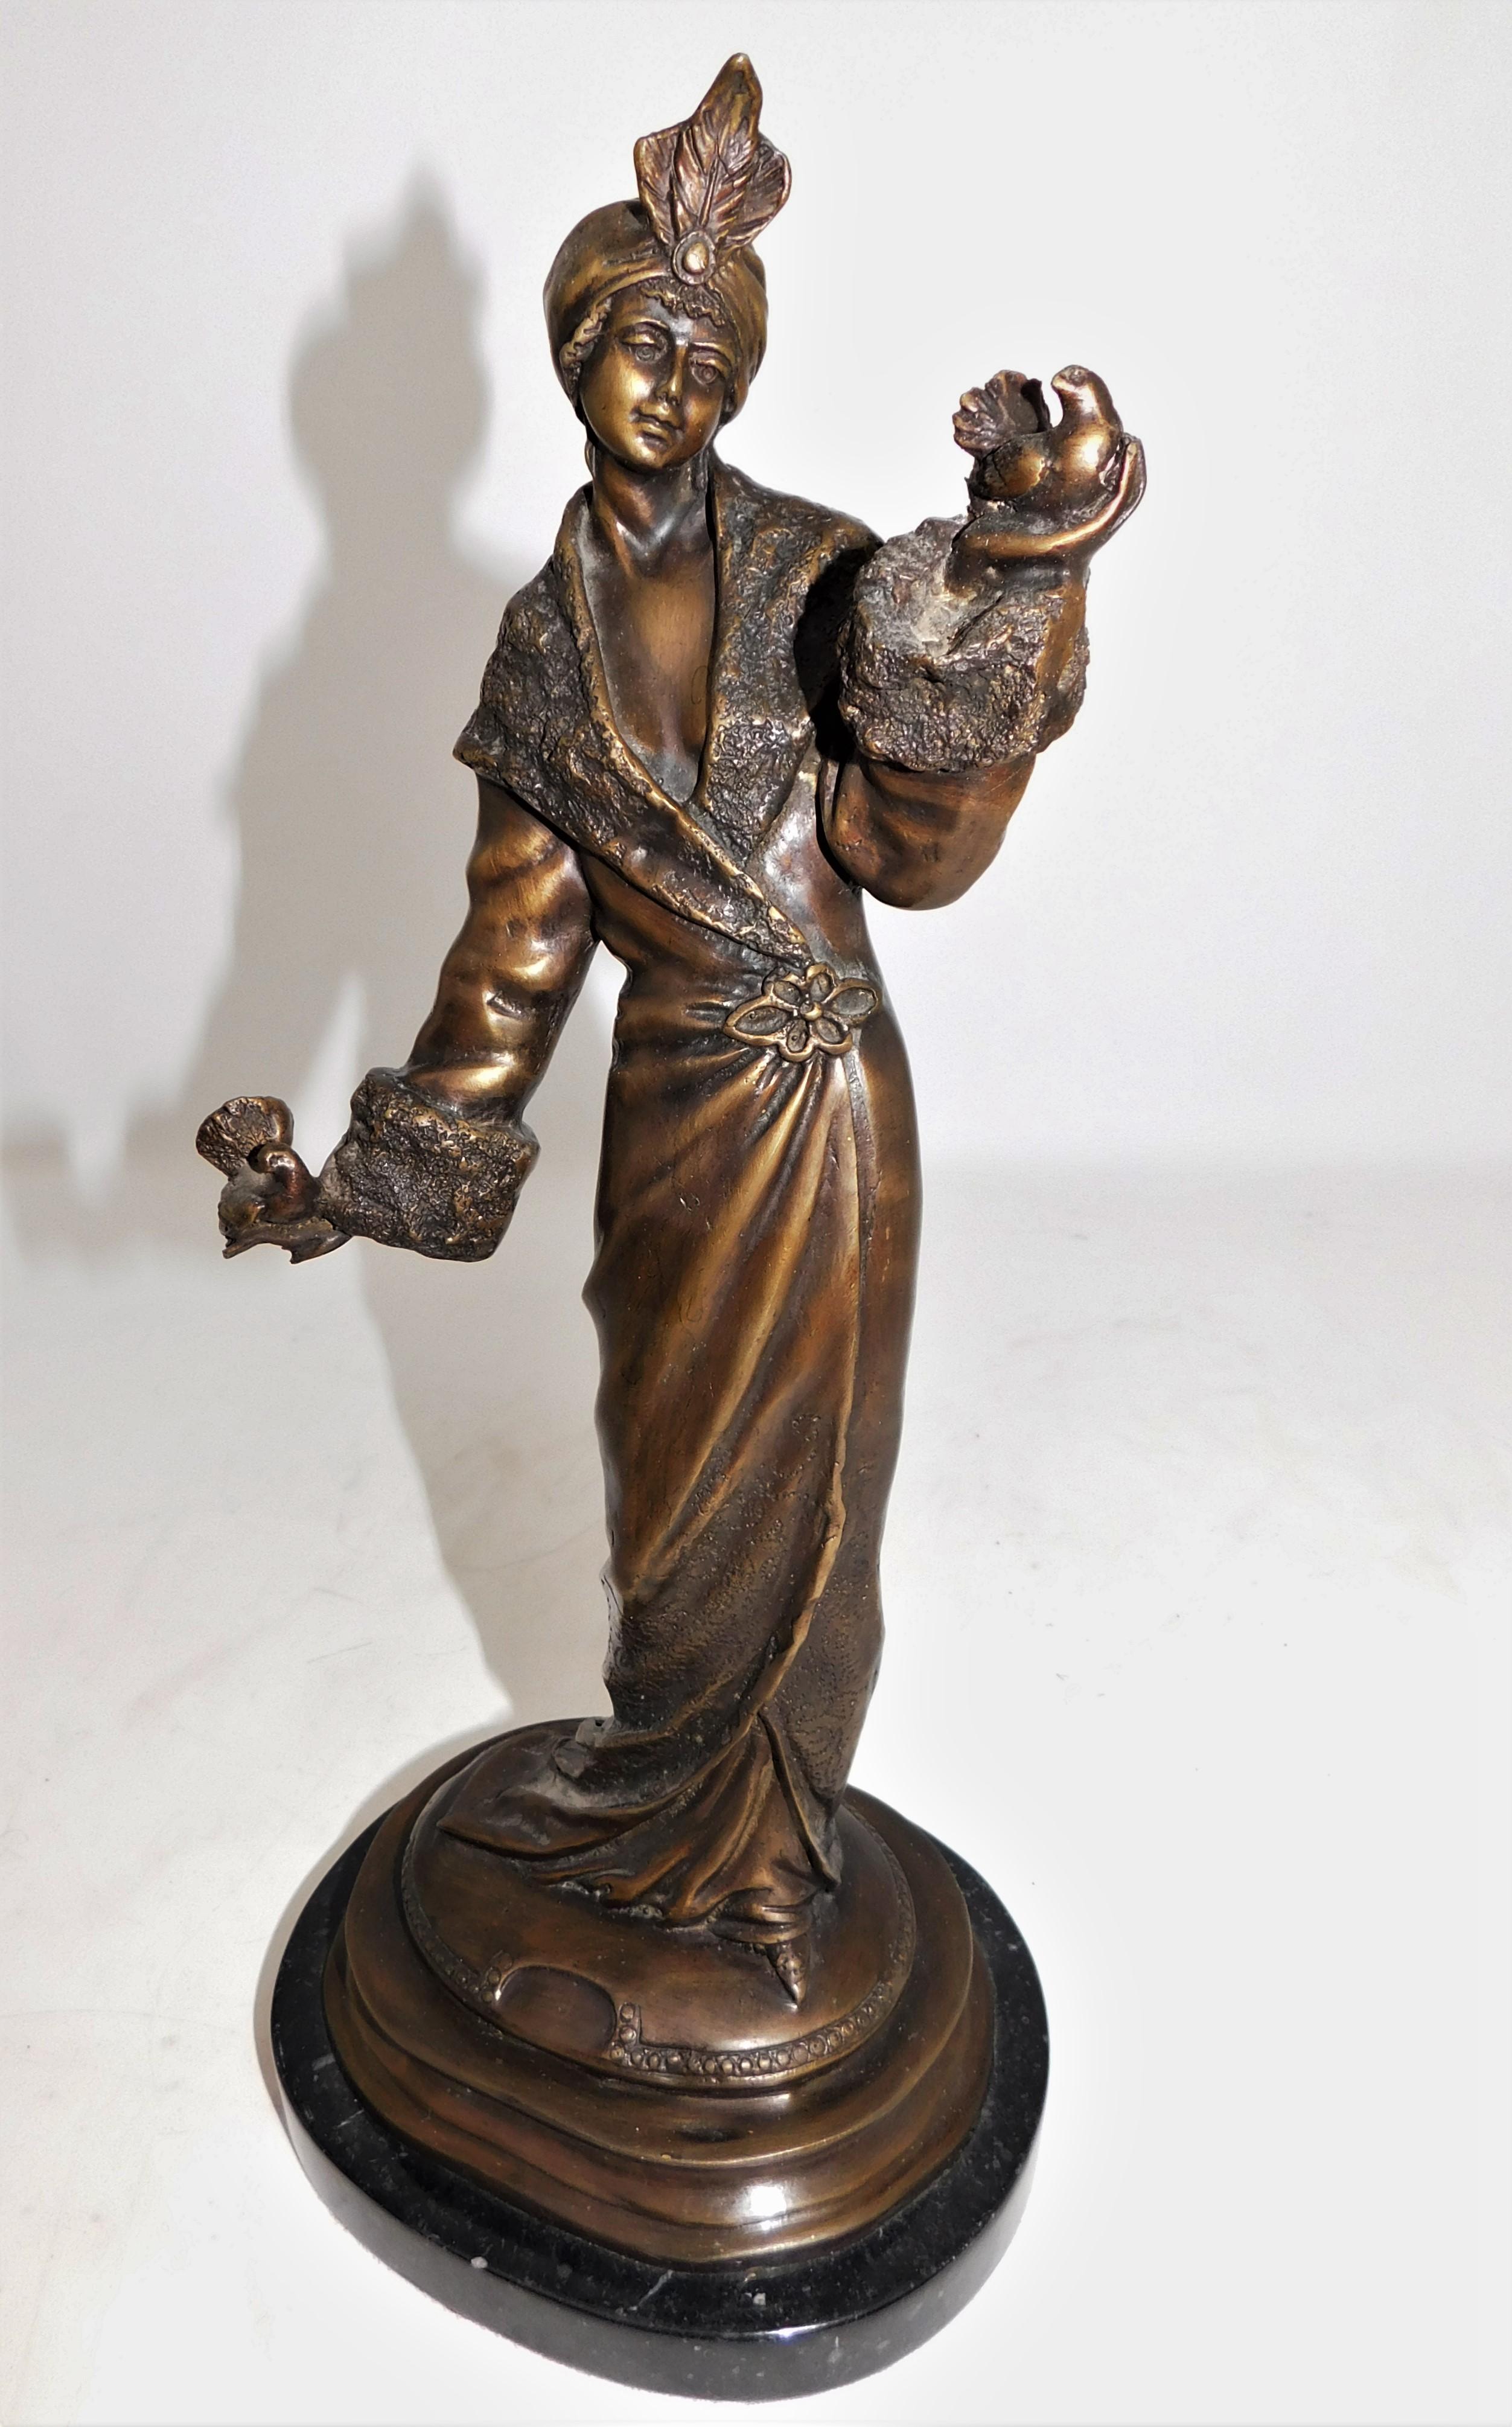 Bronze Art Deco Figurine Sculpture Woman with Doves in Flowing Dress on Marble For Sale 4